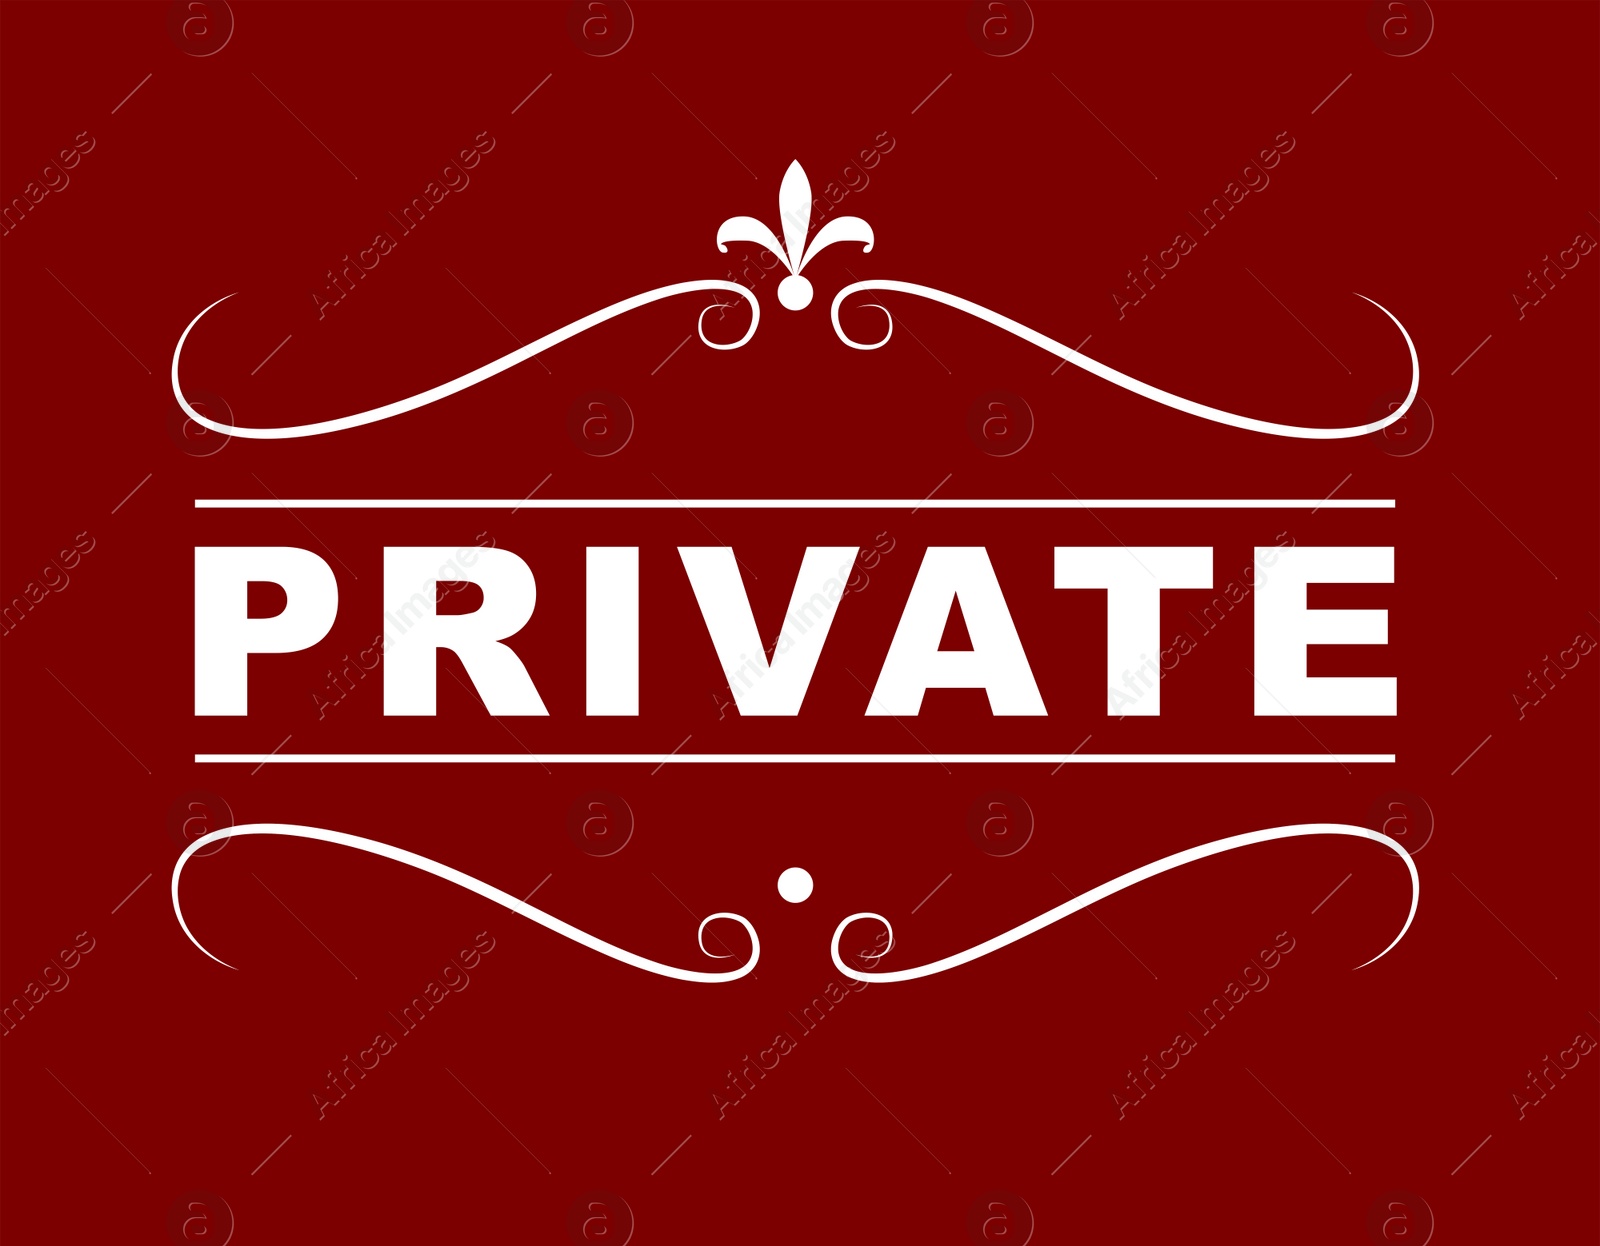 Illustration of Red and white sign with word Private